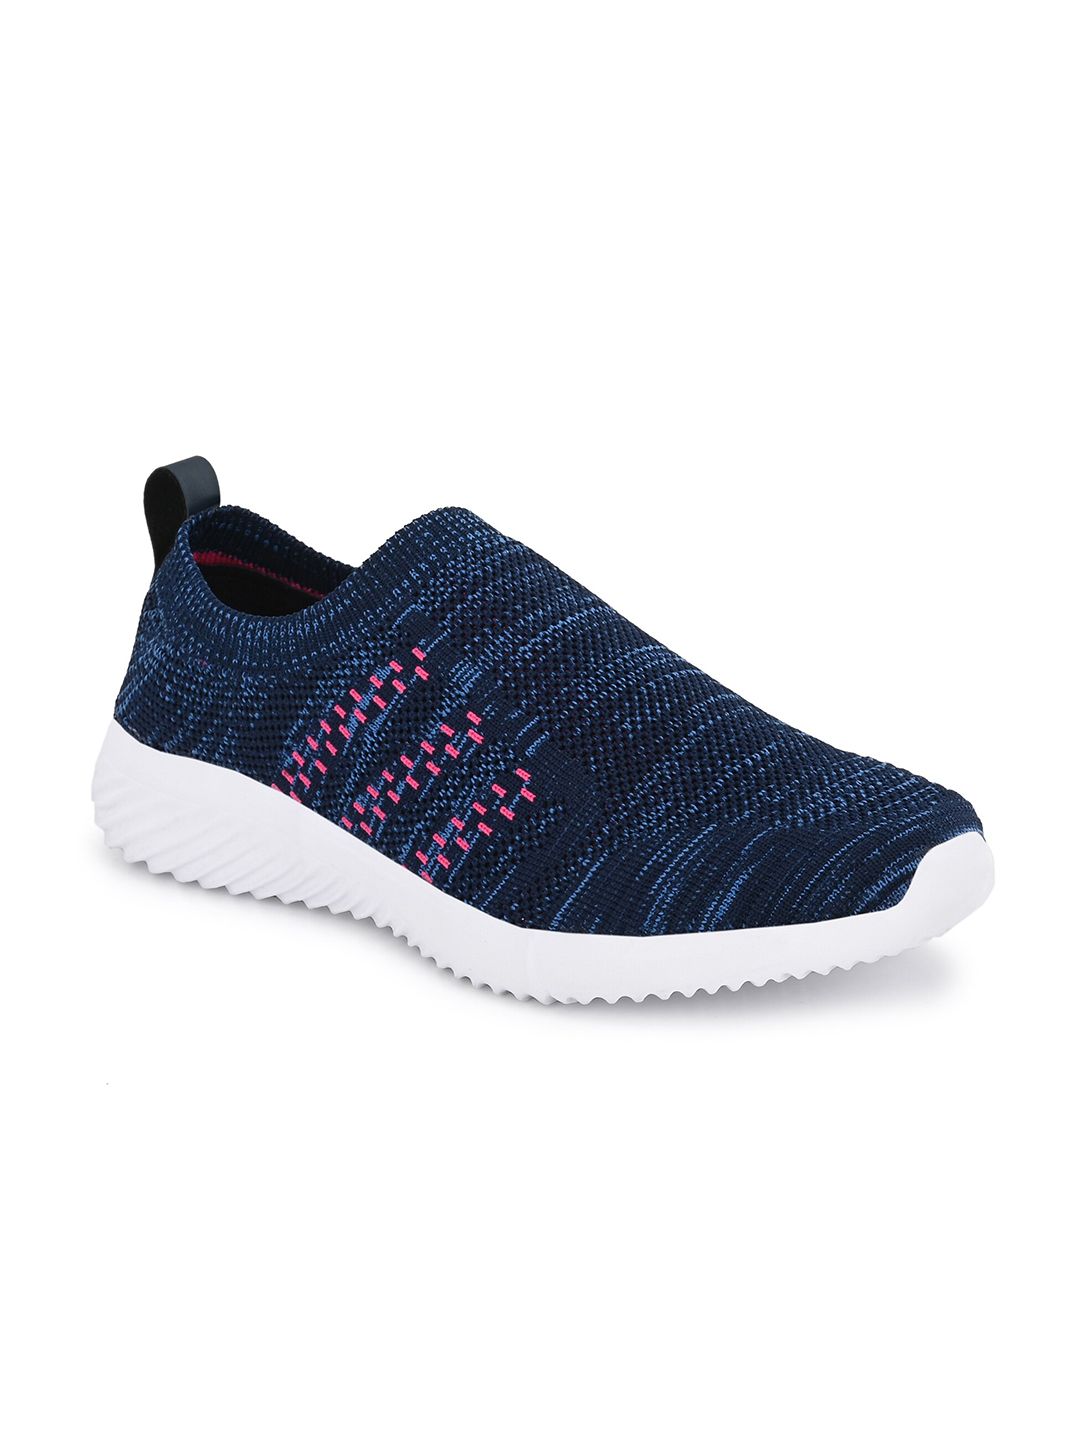 OFF LIMITS Women Navy Blue & Pink Mesh Walking Non-Marking Shoes Price in India